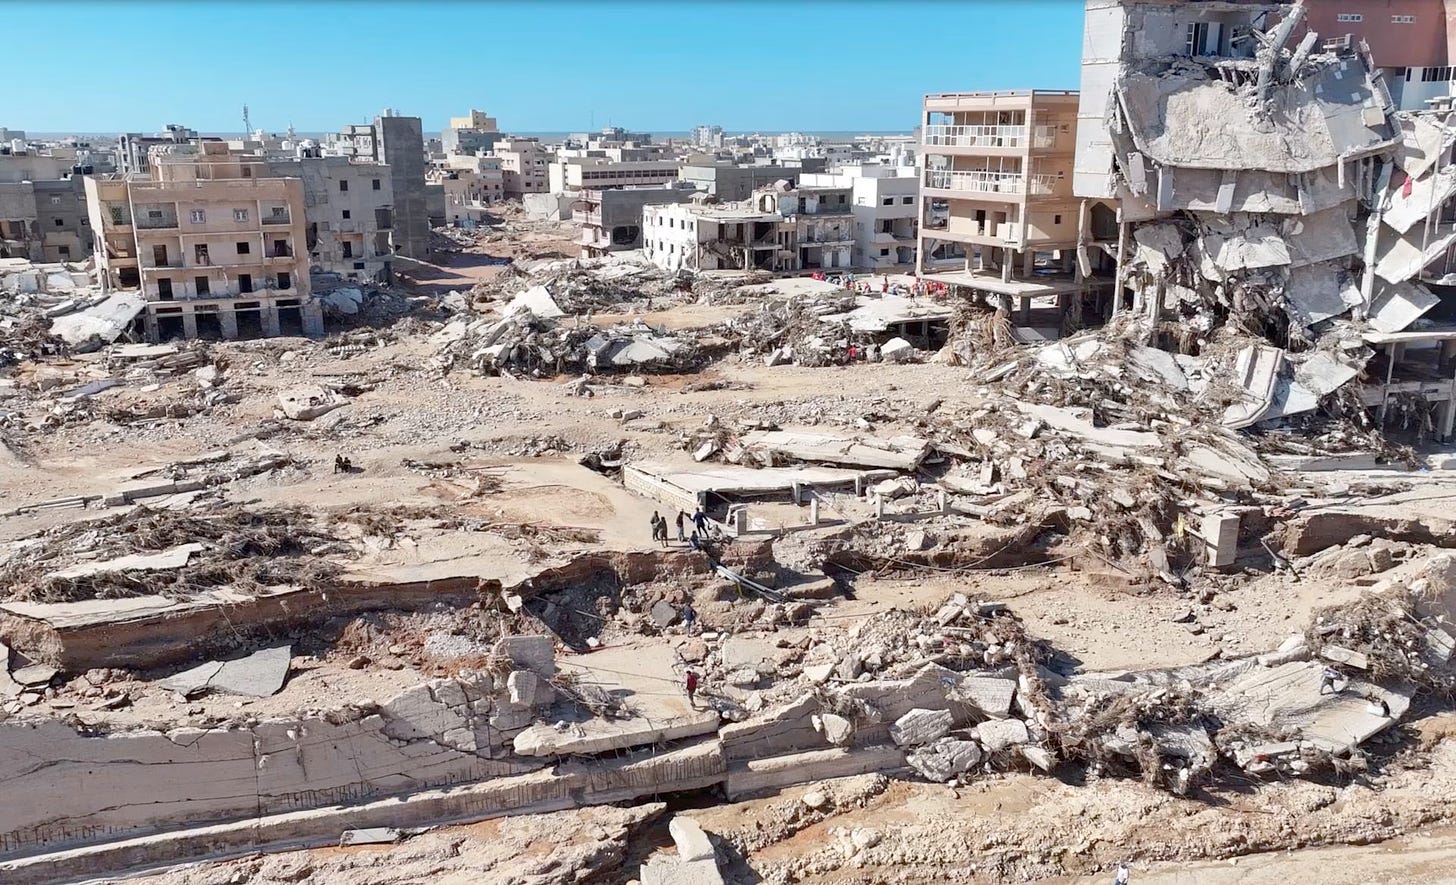 A destroyed landscape in Derna, most buildings leveled, the rest teetering on collapse.